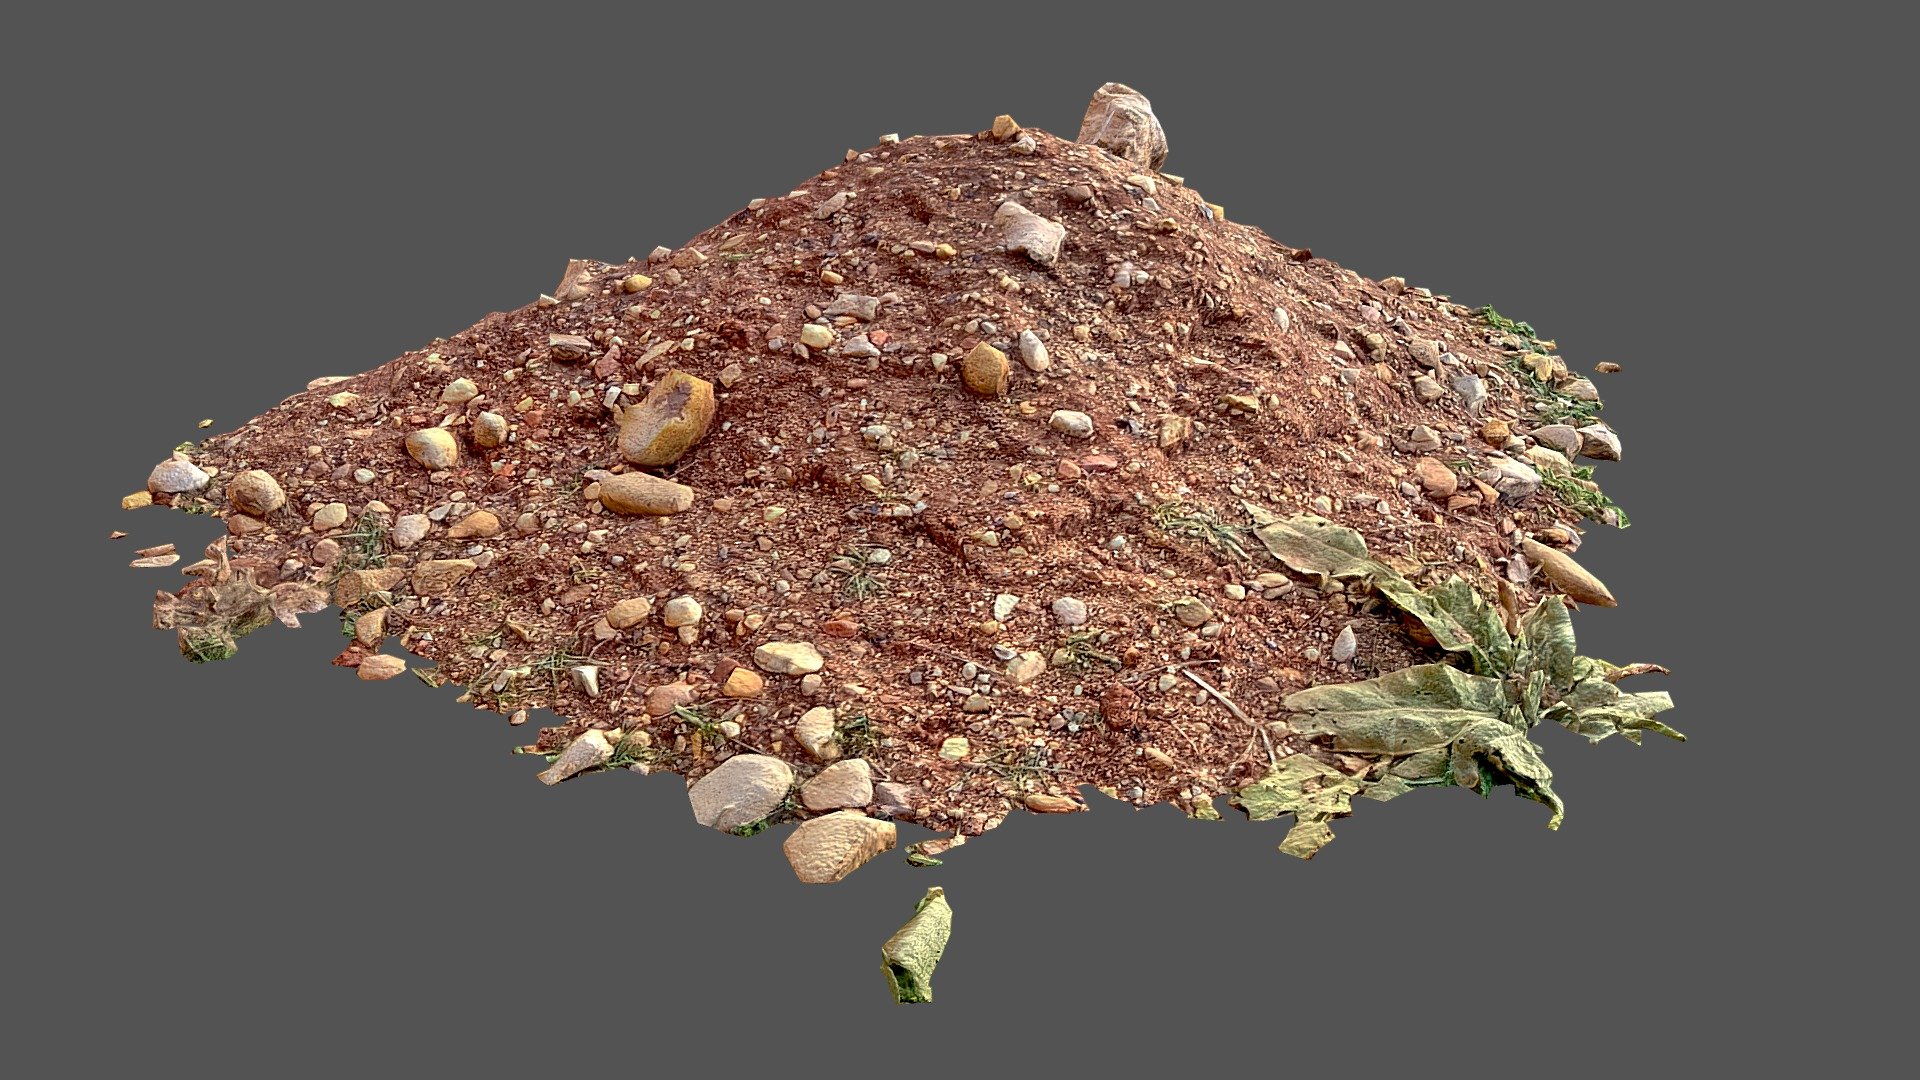 Low-poly photogrammetry scan of a small pile of soil earth rubble with vegetation details for use as background asset.

Correct white balance on the source photos.

Created using RealityCapture + Blender.

Triangles: 11660

Texture resolution (Diffuse &amp; Normal): 4096x4096 - Photoscan Low-poly Earth Rubble soil pile - Buy Royalty Free 3D model by Martin Topolski (@martin.topolski) 3d model